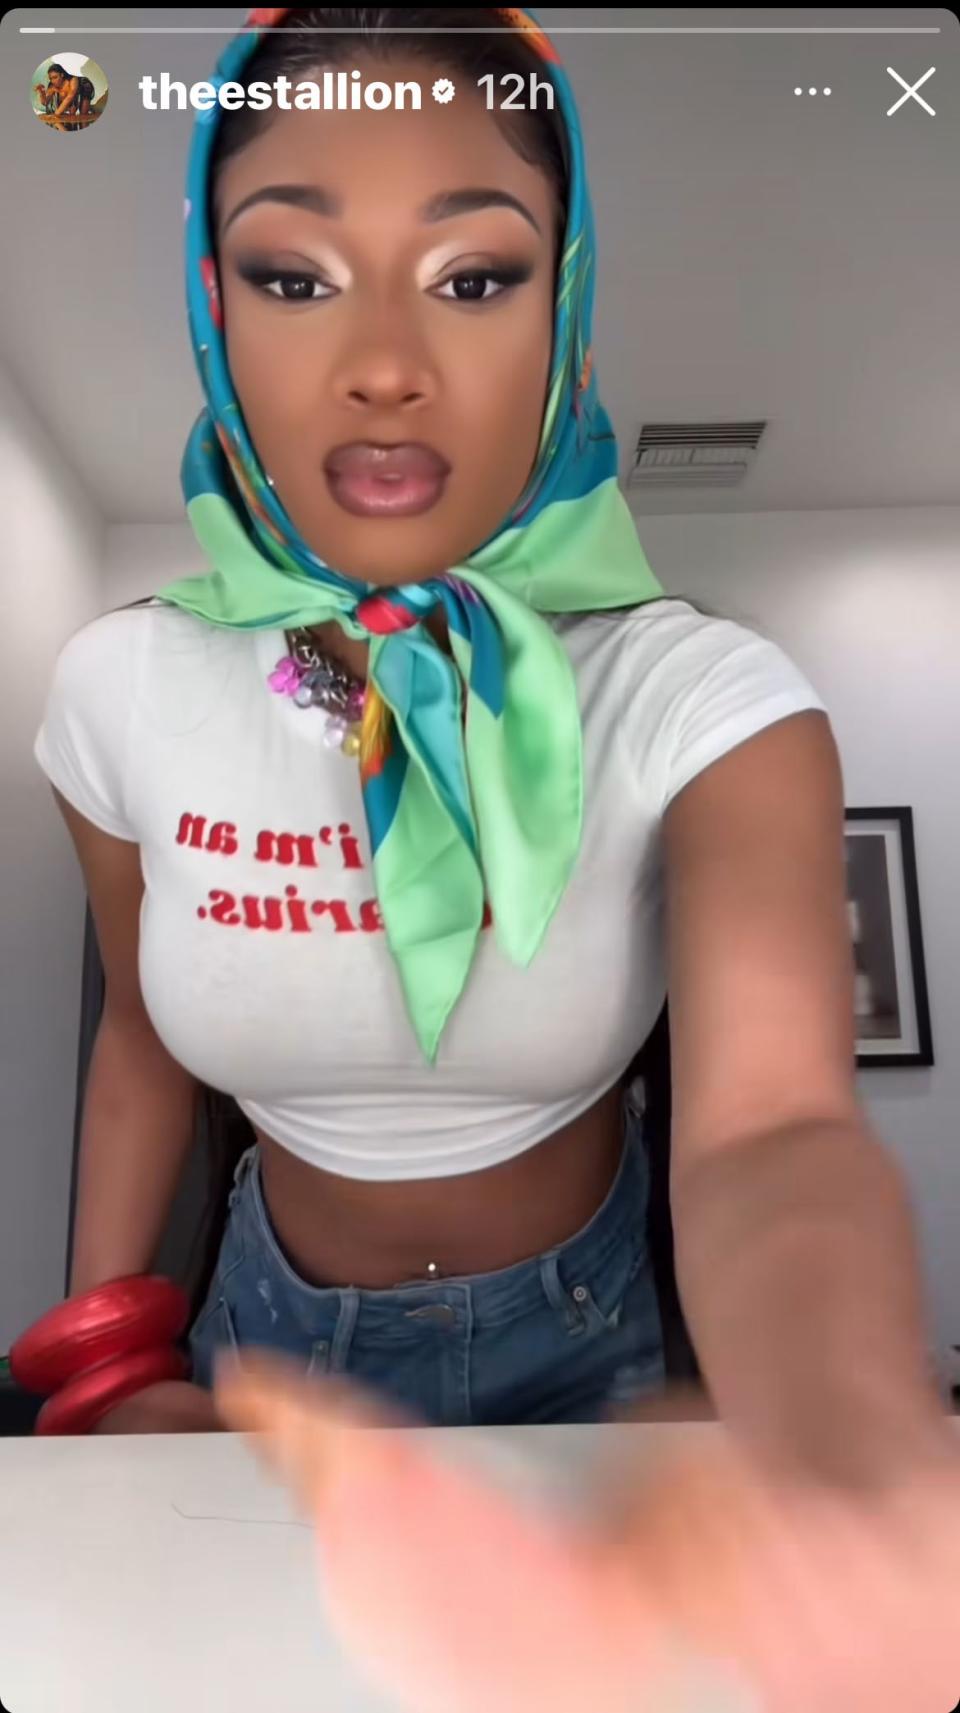 <cite class="credit">Courtesy of Instagram/[@theestallion](https://www.instagram.com/theestallion/?hl=en){: target="_blank"}.</cite>